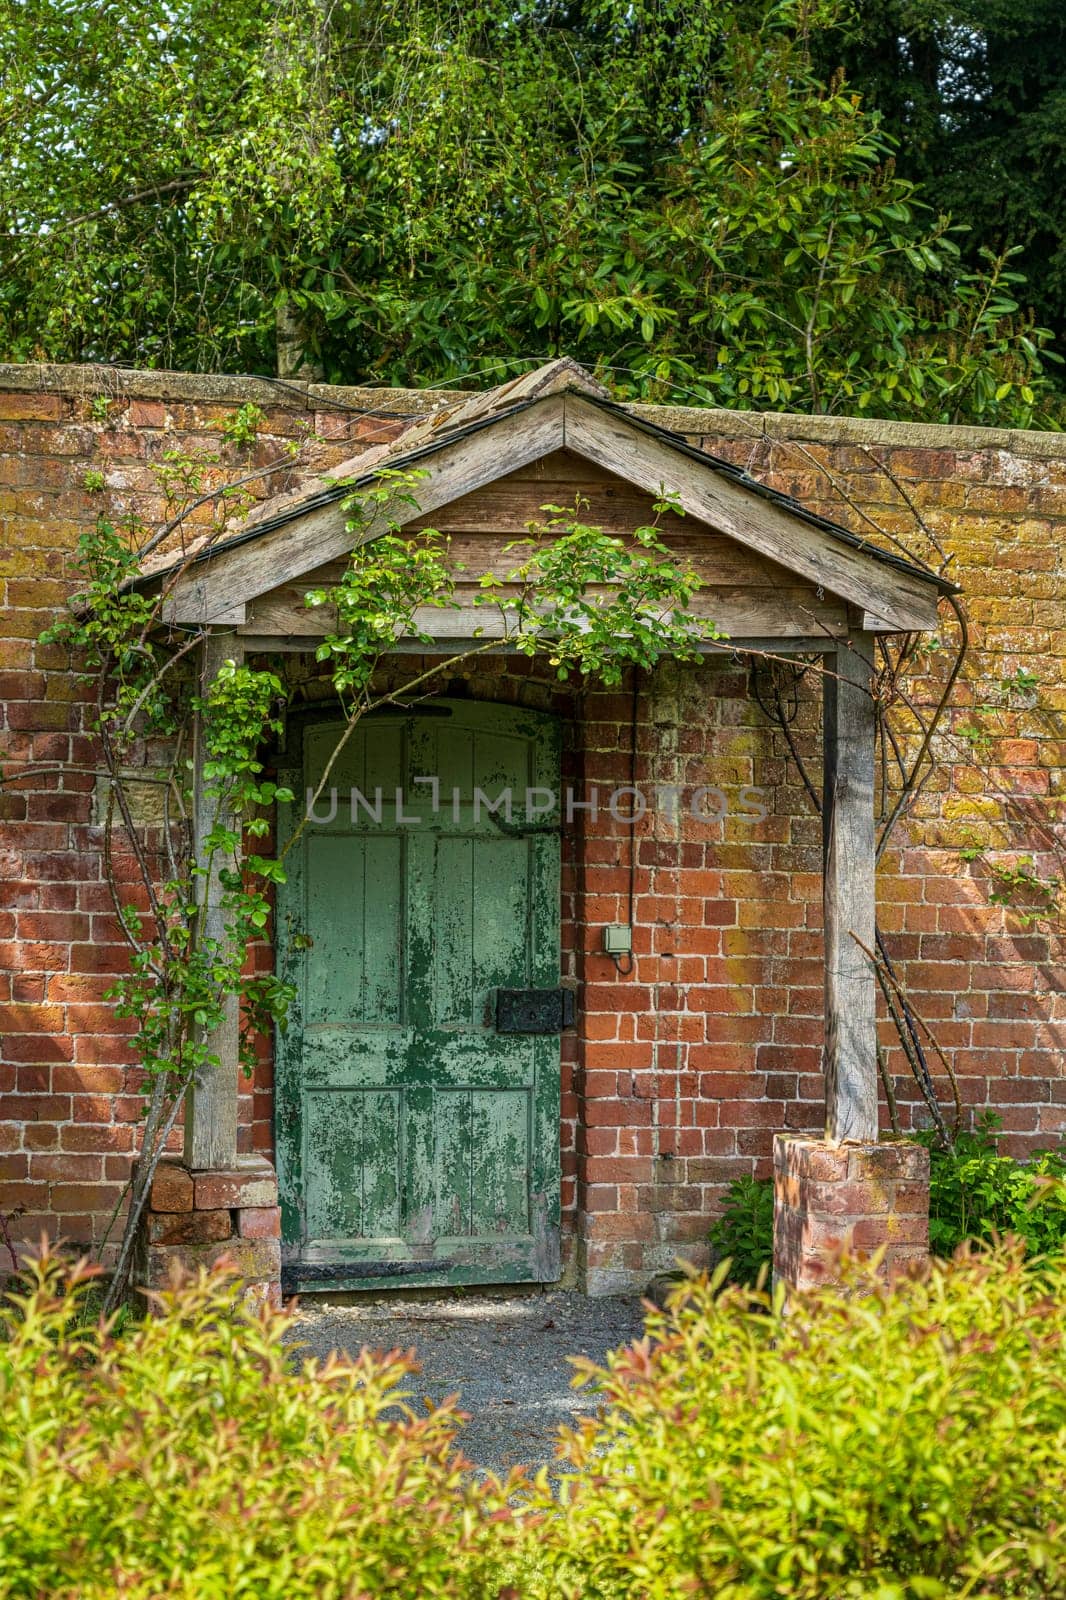 Painted green door and wooden porch as entrance to walled garden made with brick